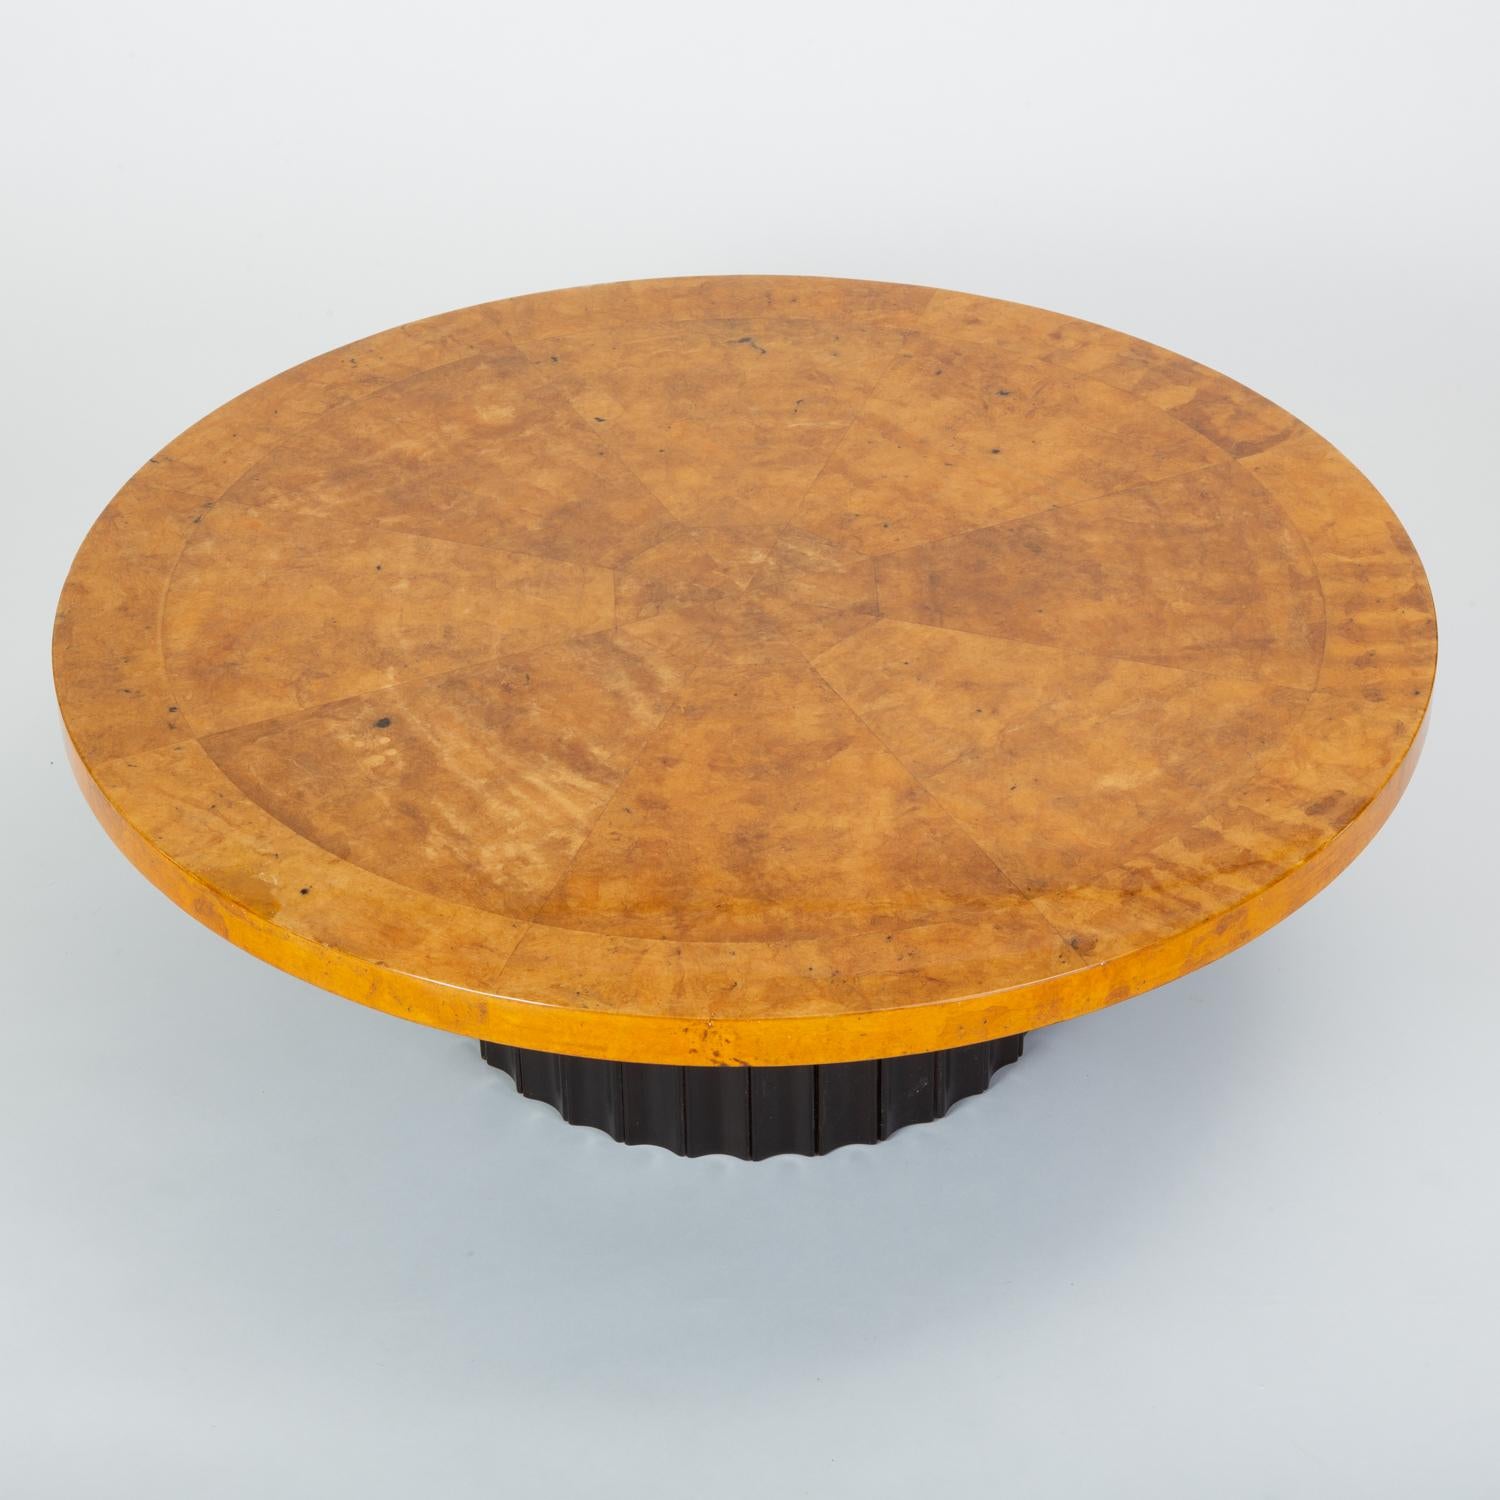 Custom 1970s Round Coffee Table in Lacquered Parchment with Pedestal Base 1